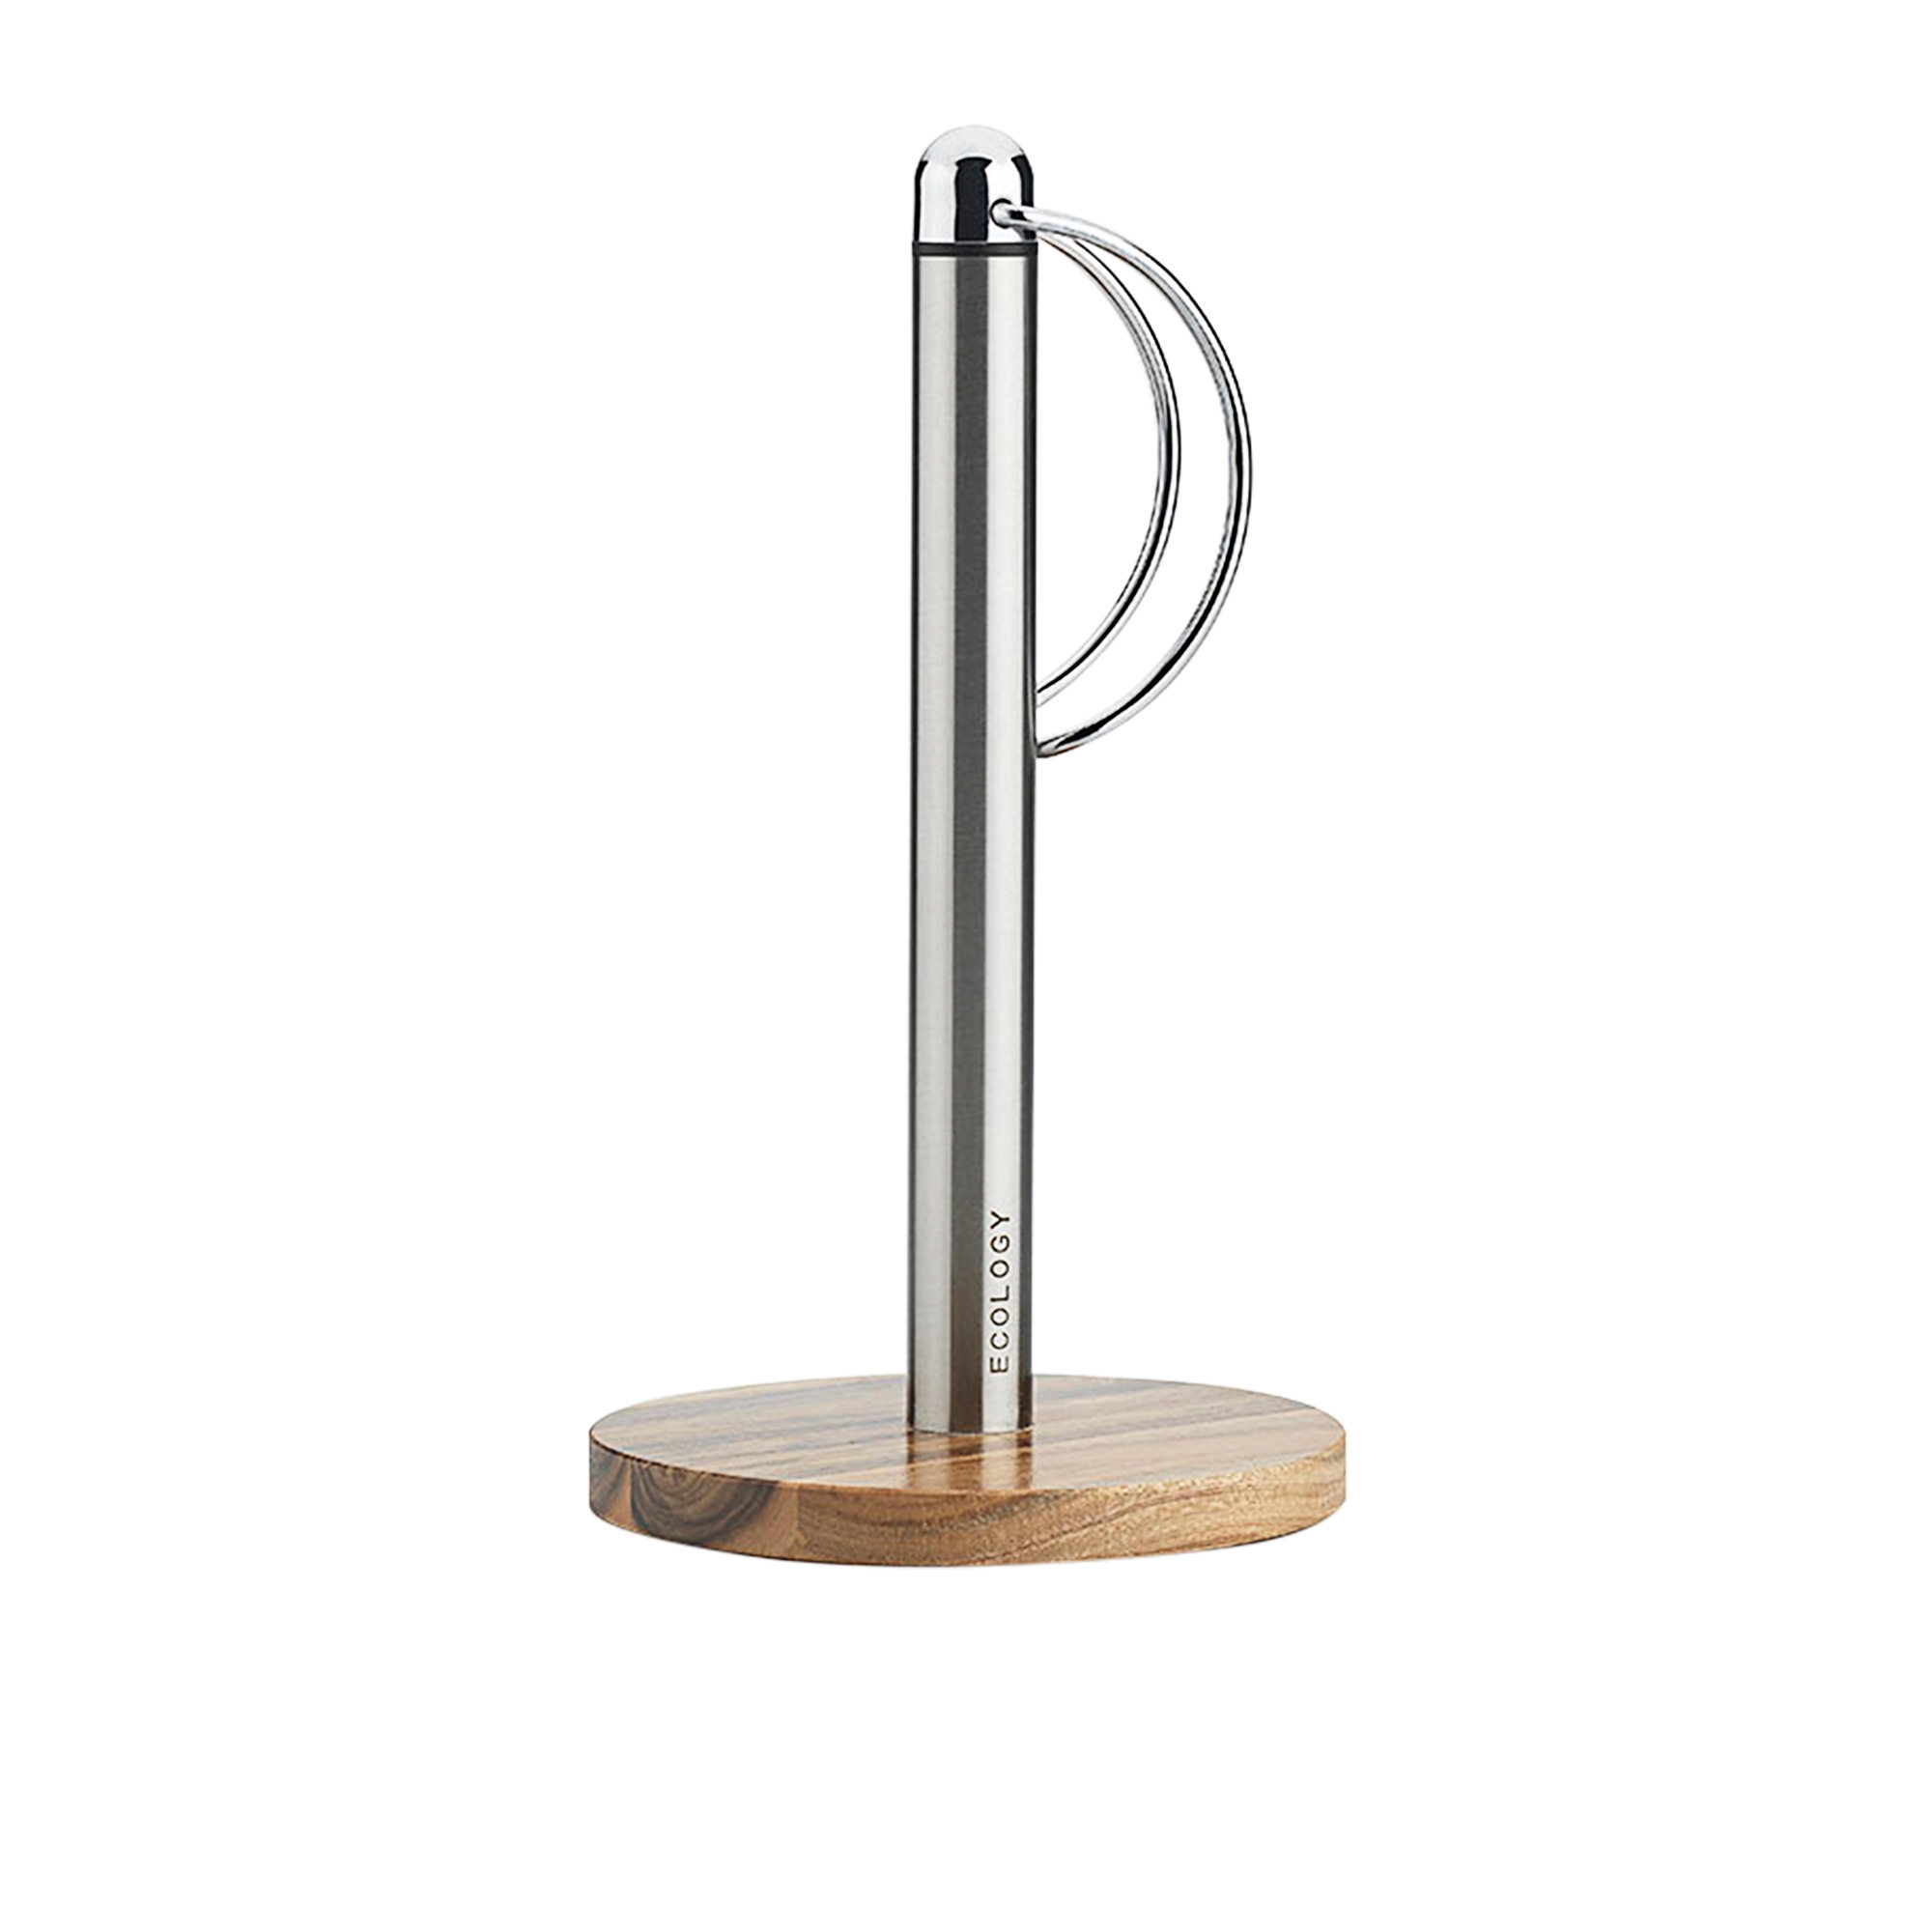 Ecology Acacia Provisions Paper Towel Holder Image 1